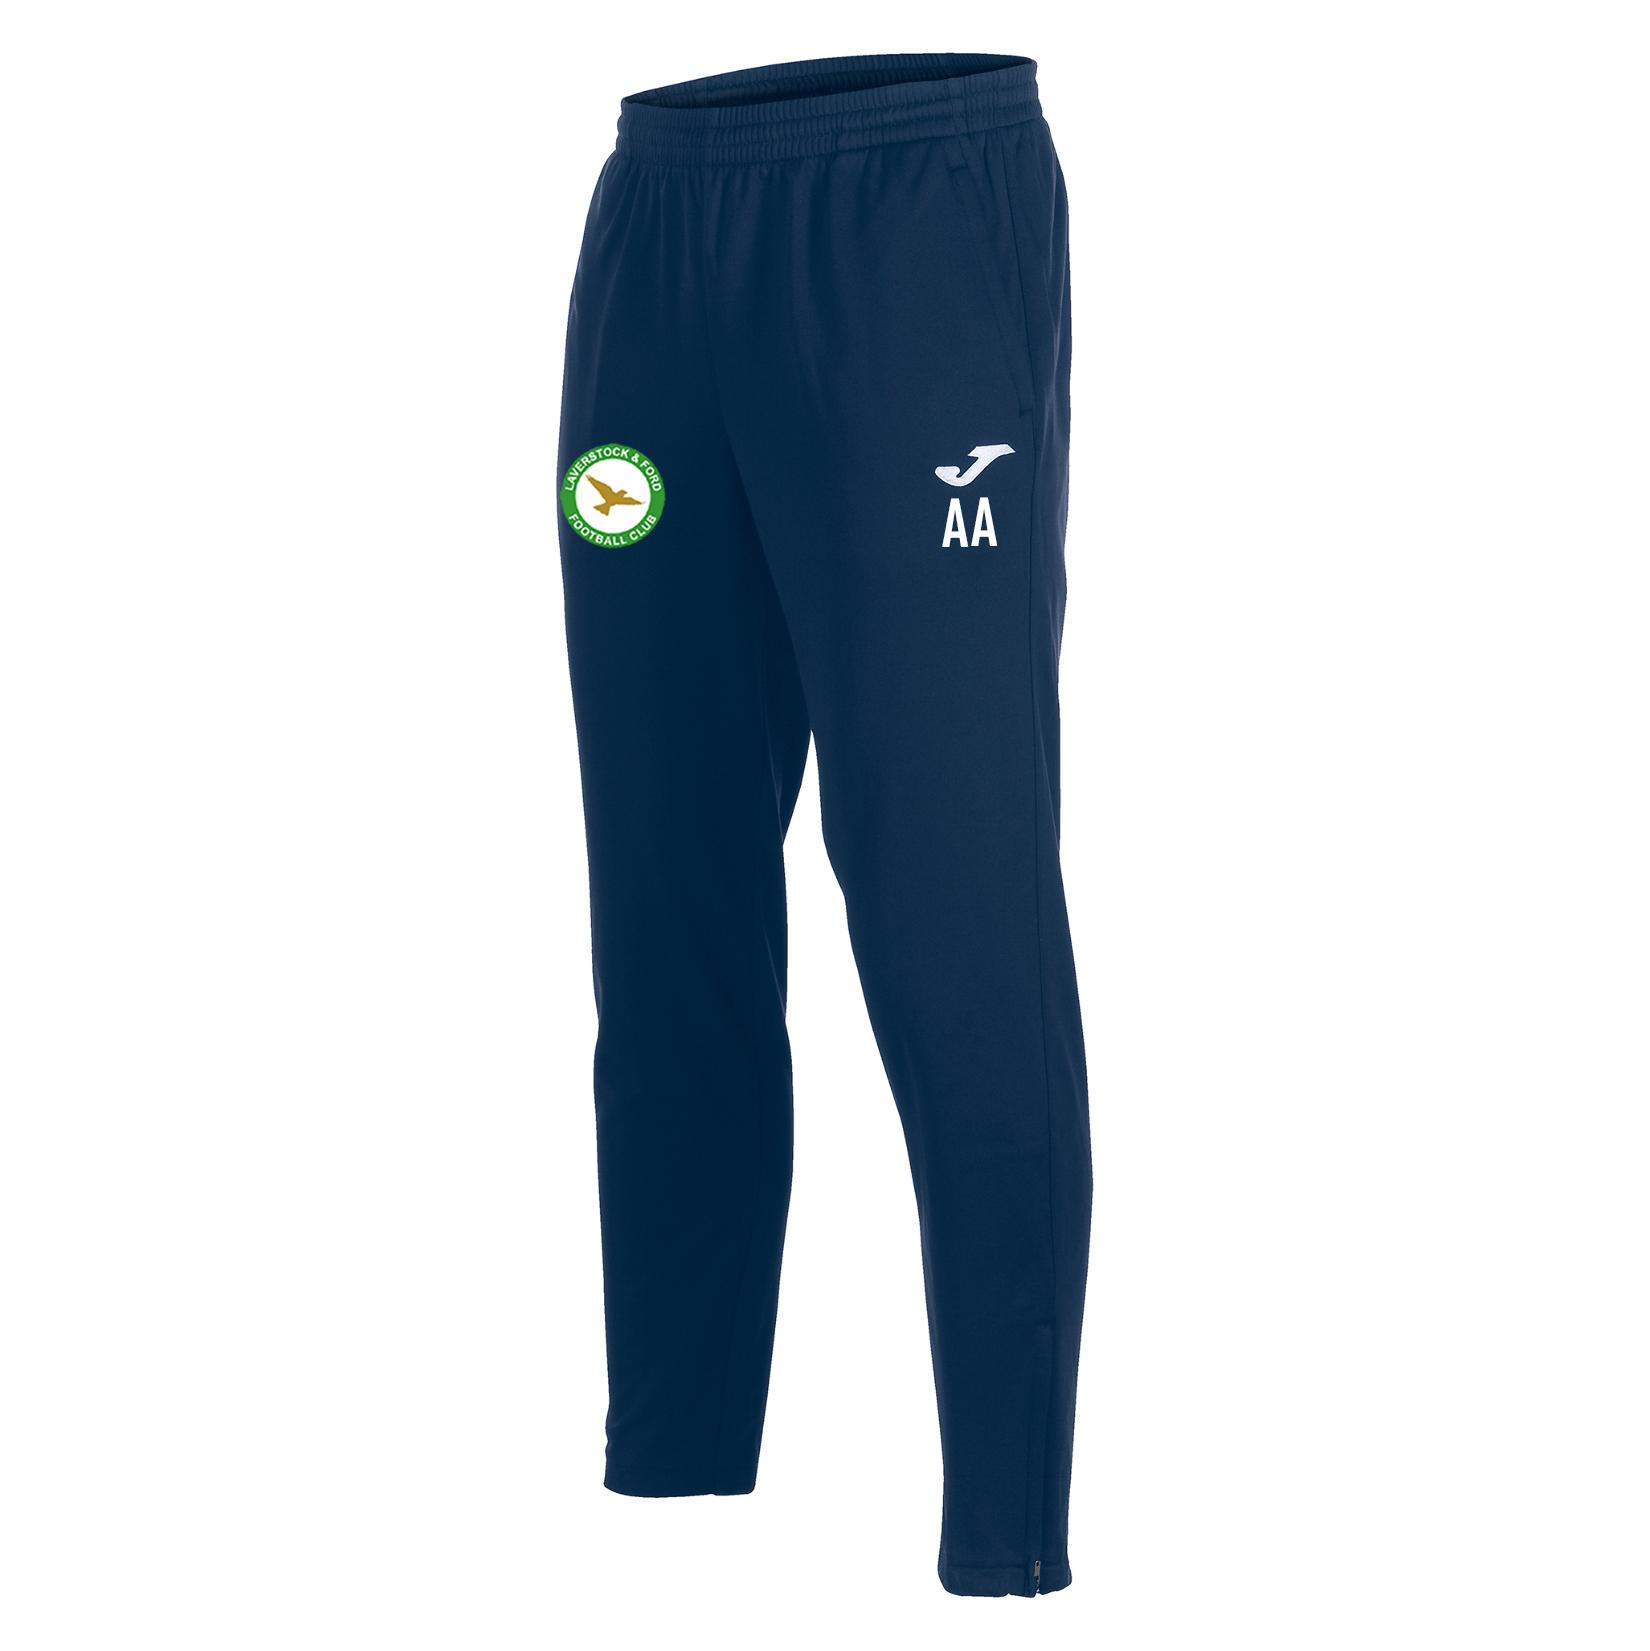 Joma Nilo Tech Pants (fitted)